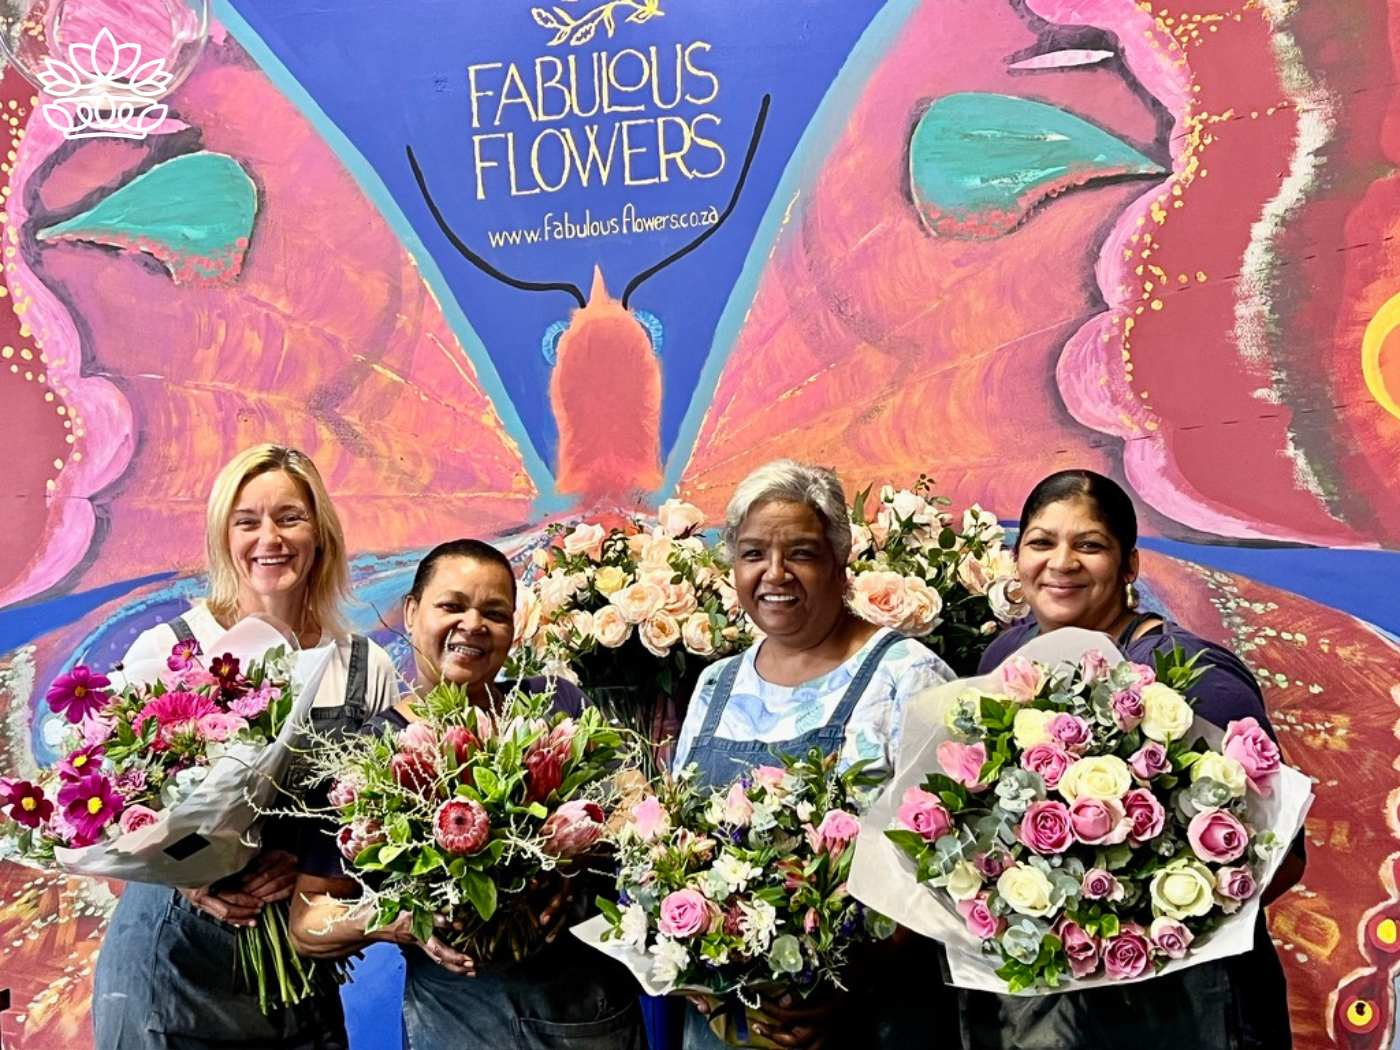 Four cheerful florists holding vibrant bouquets of flowers, with the Fabulous Flowers and Gifts logo proudly displayed in the background, showcasing their artistry and passion for floral arrangements.